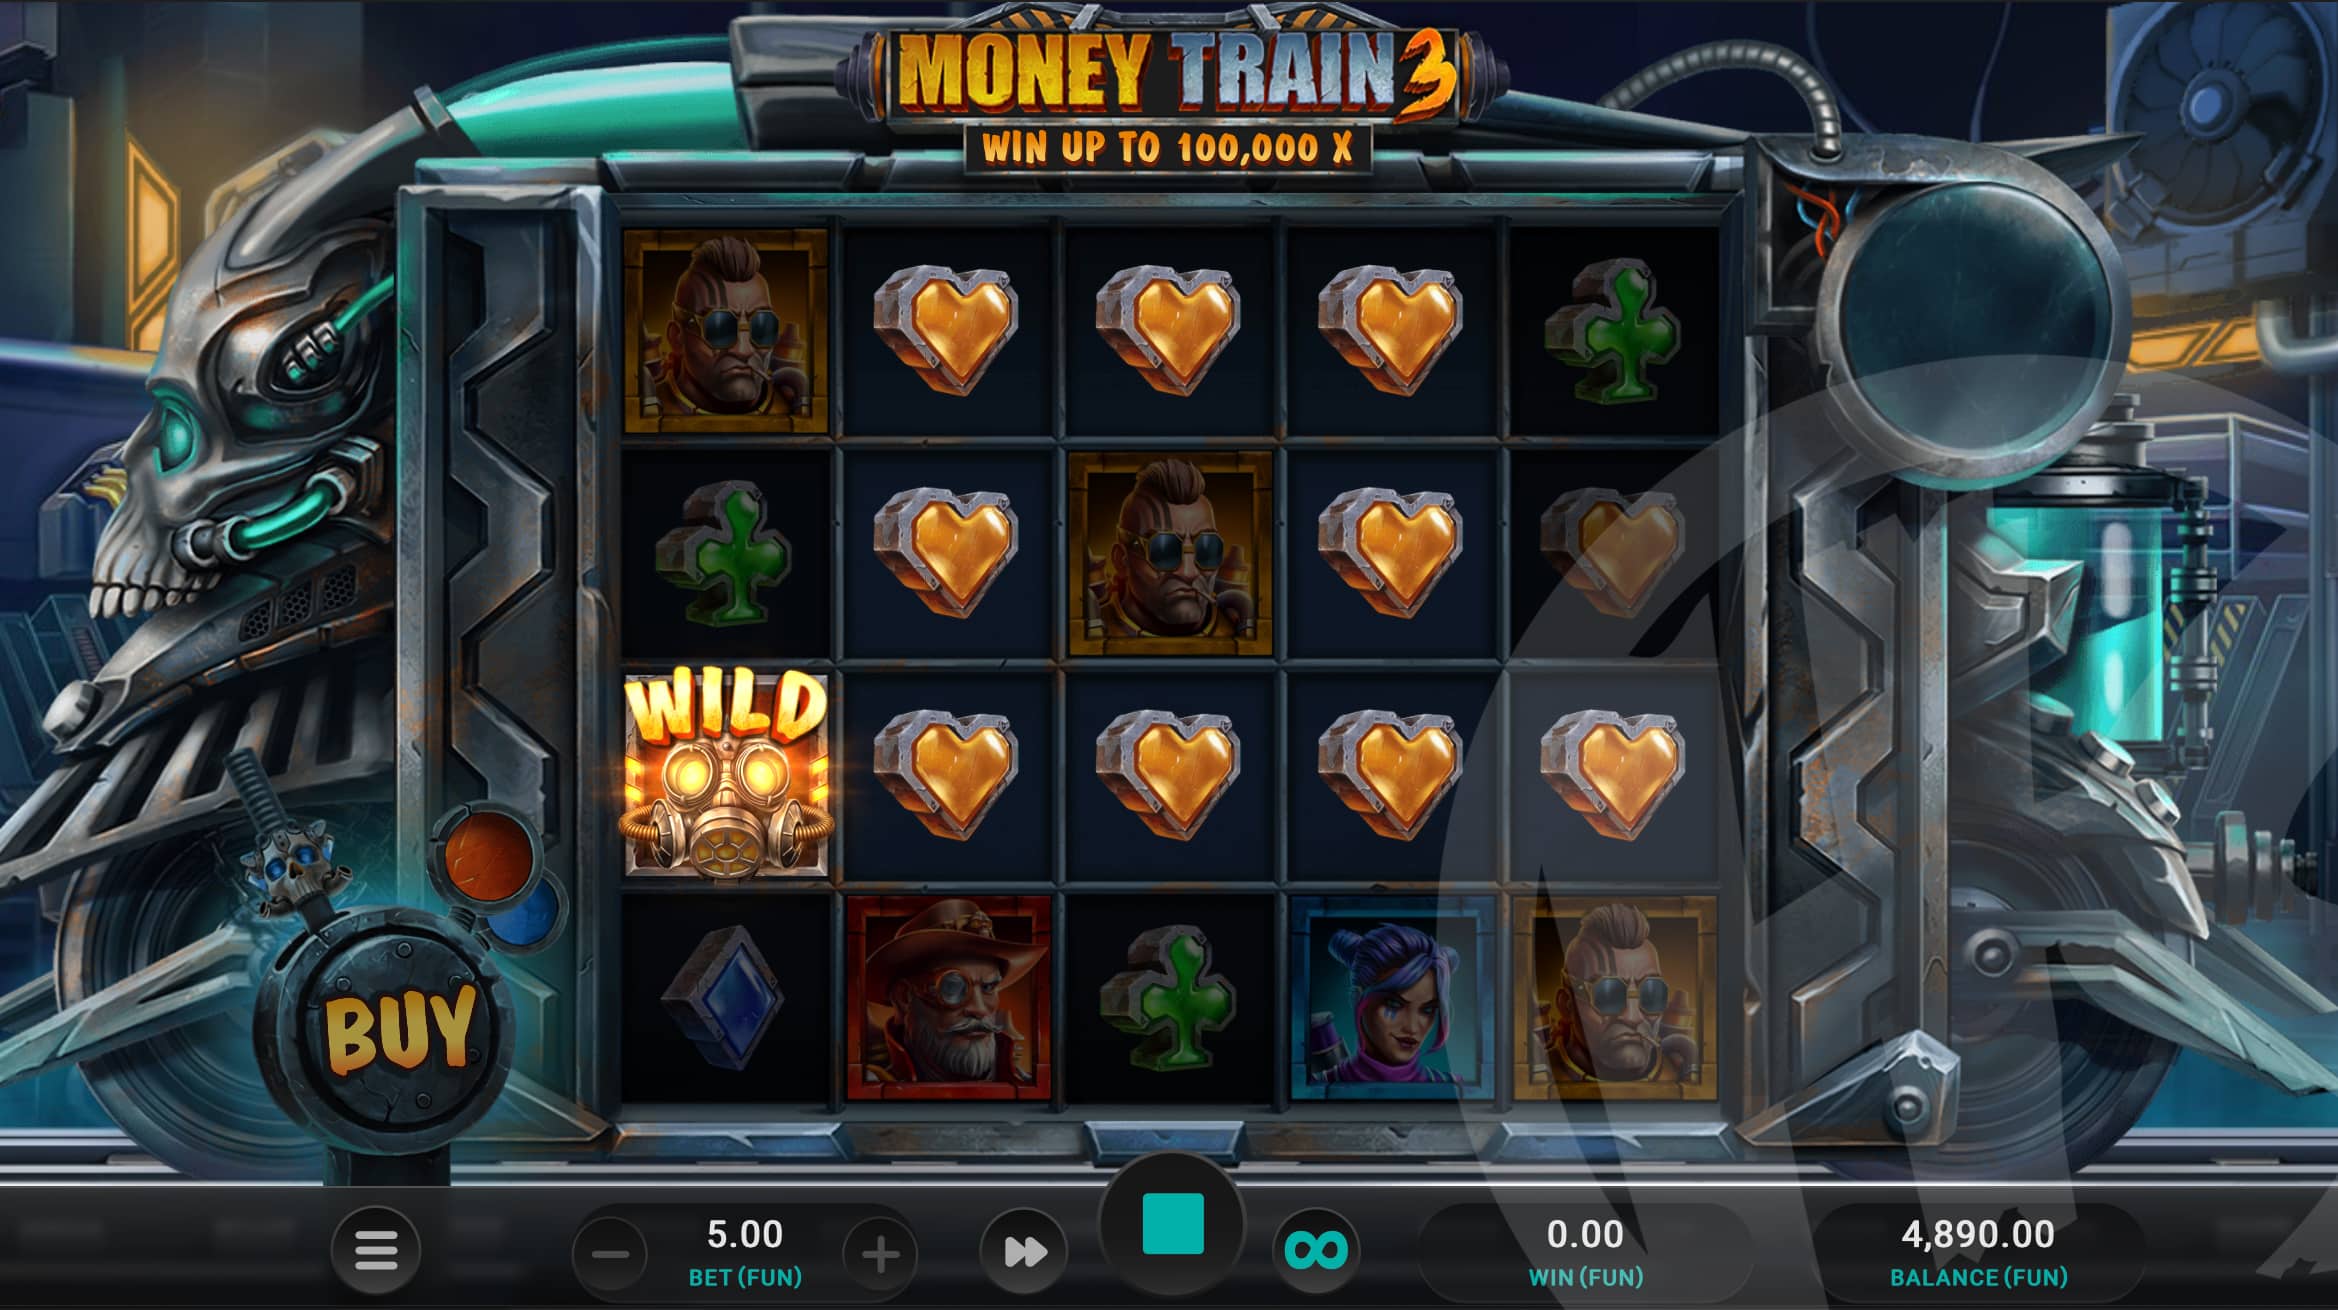 Money Train 3 Features 40 Fixed Win Lines